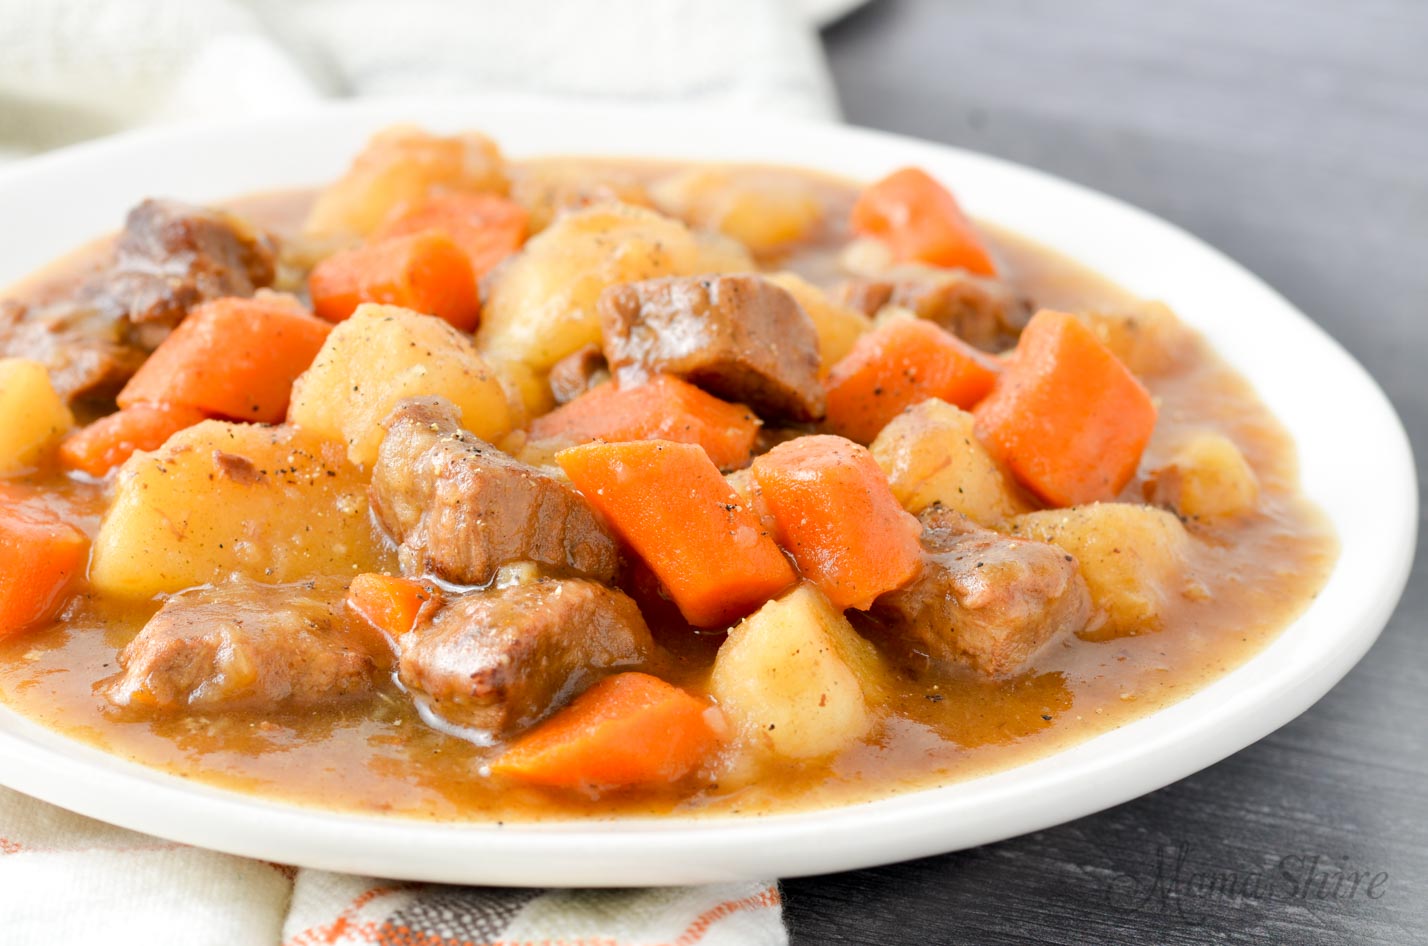 A serving of beef stew on a white plate that includes beef, carrots, potatoes, onions, and a nice thick gravy.